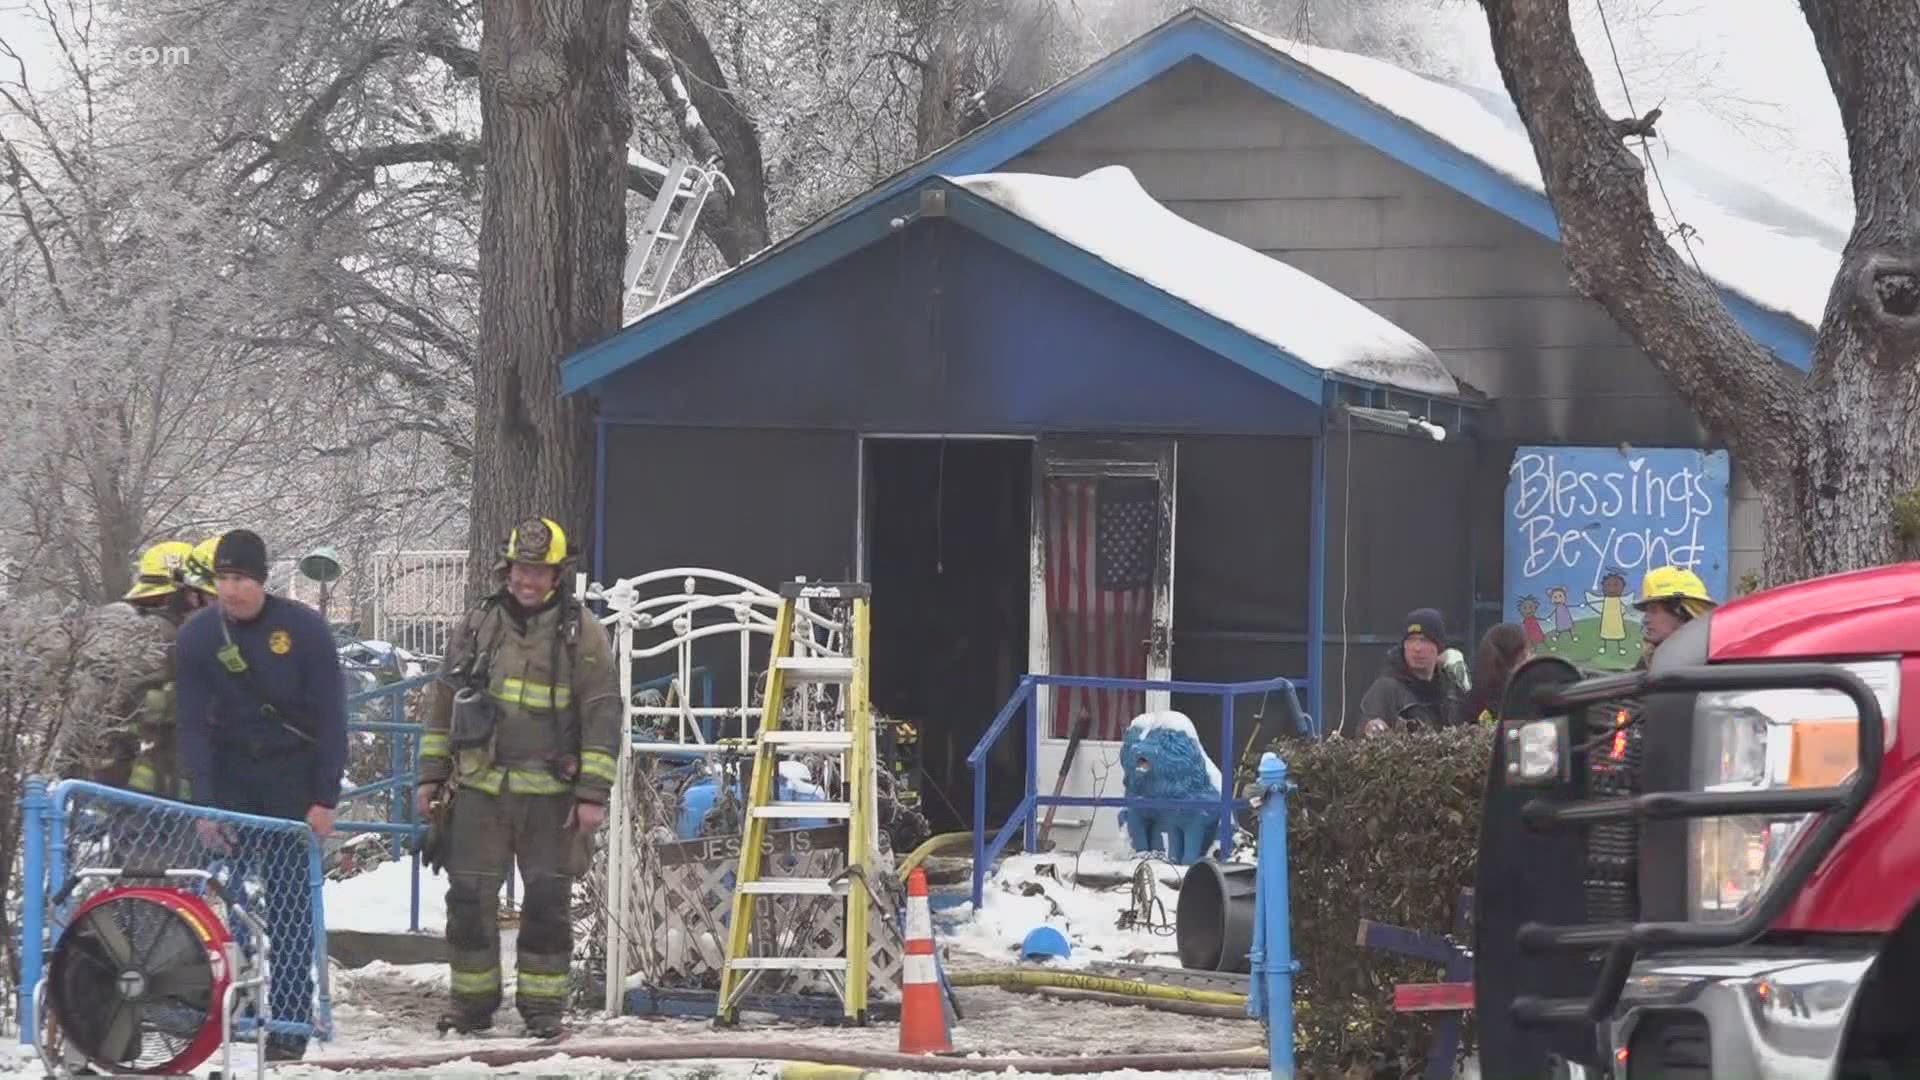 Two people were killed an four others were hurt in a house fire on Wednesday.